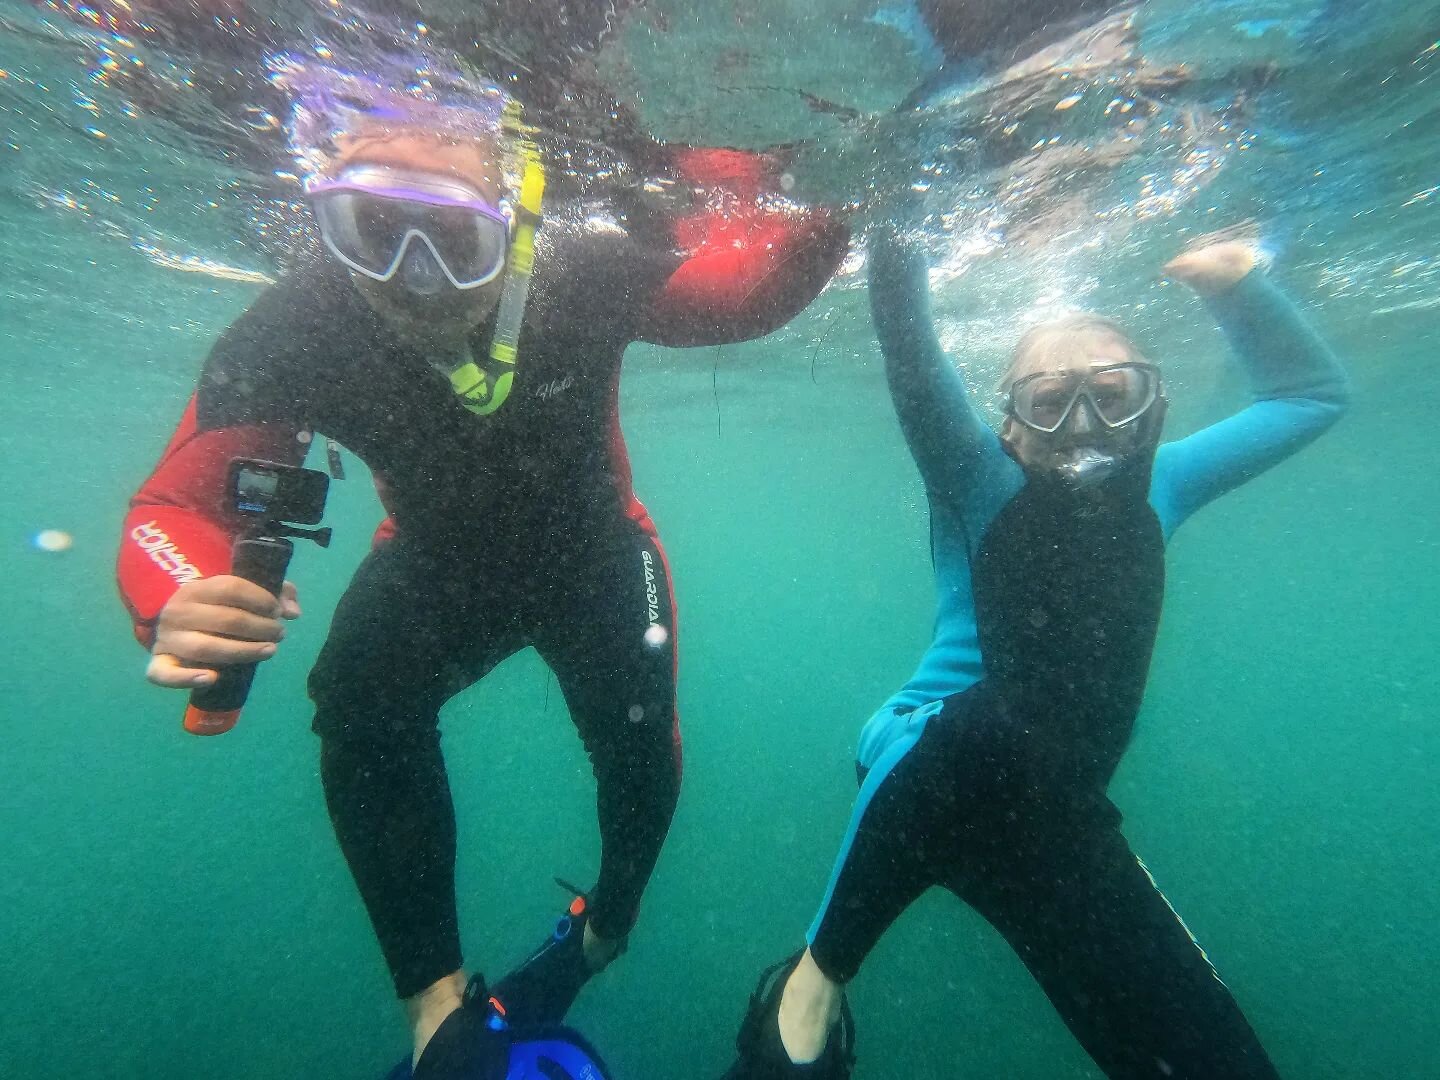 Every day we have some fun in the water! Sign up today!
.
.
.
#adventure #snorkel #sandiego #california #ocean #swimming #family #fun #travel